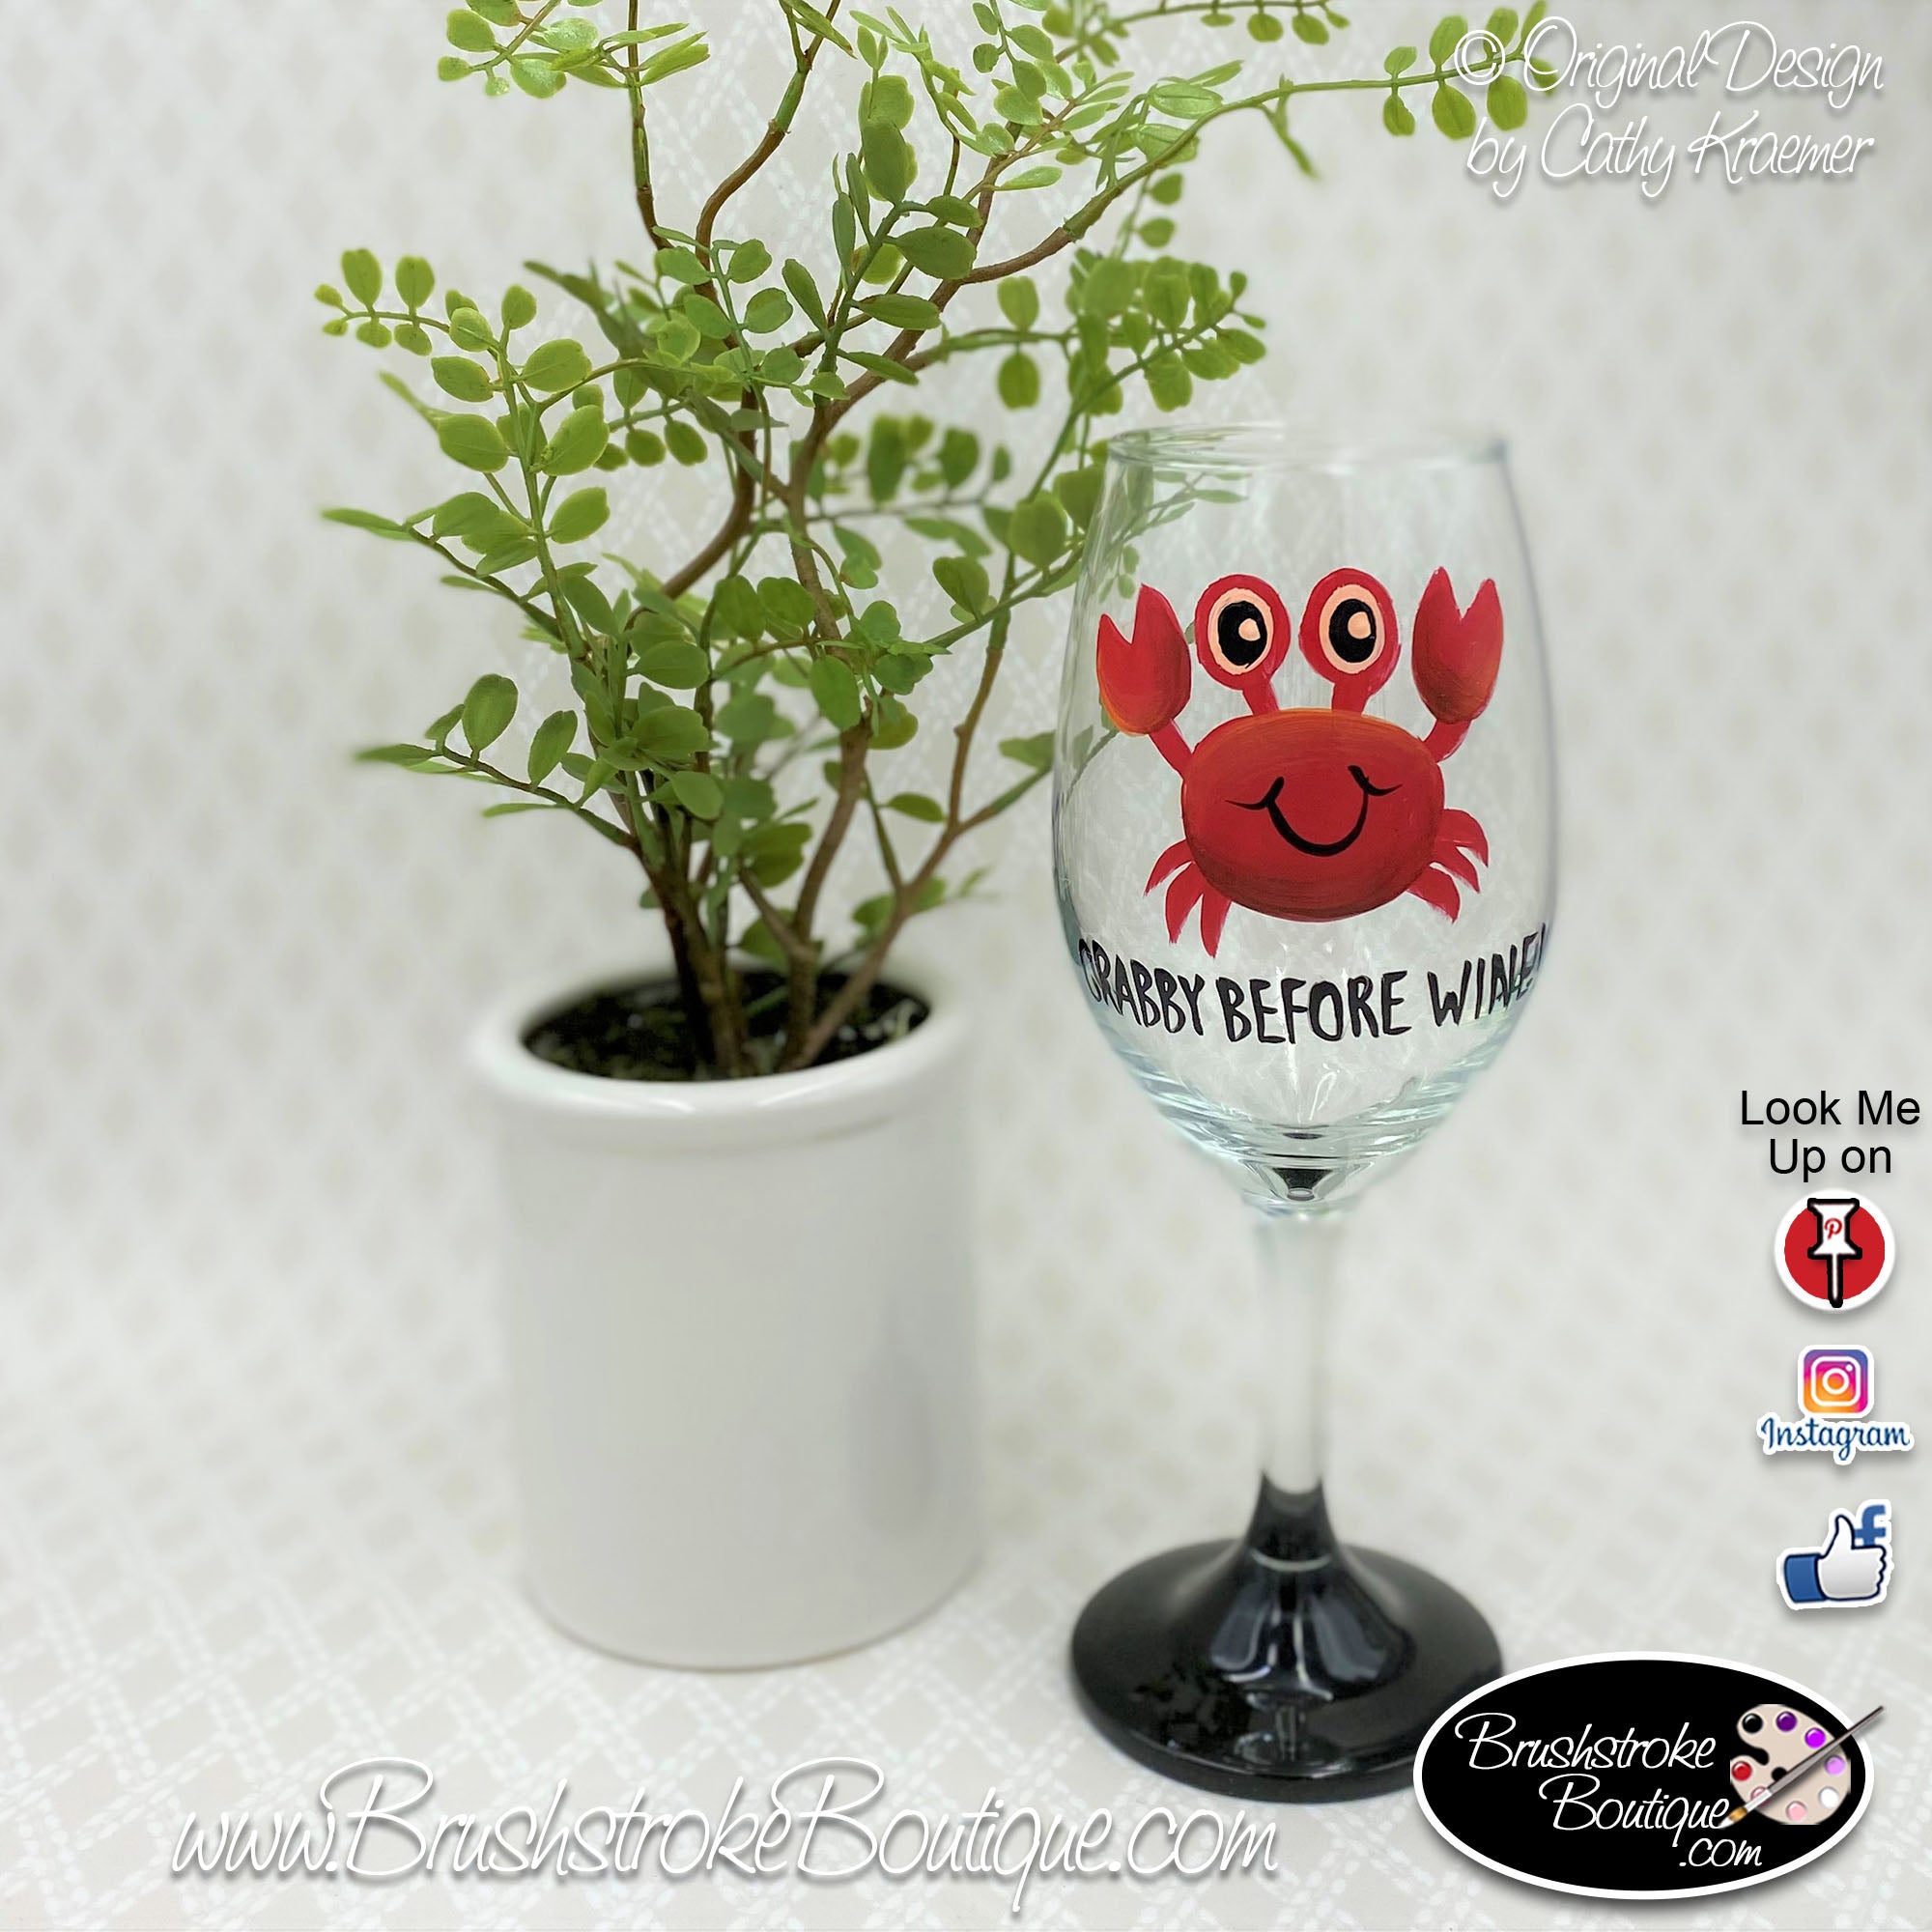 Hand Painted Wine Glass - Abominable Snowman Yeti - Original Designs by  Cathy Kraemer